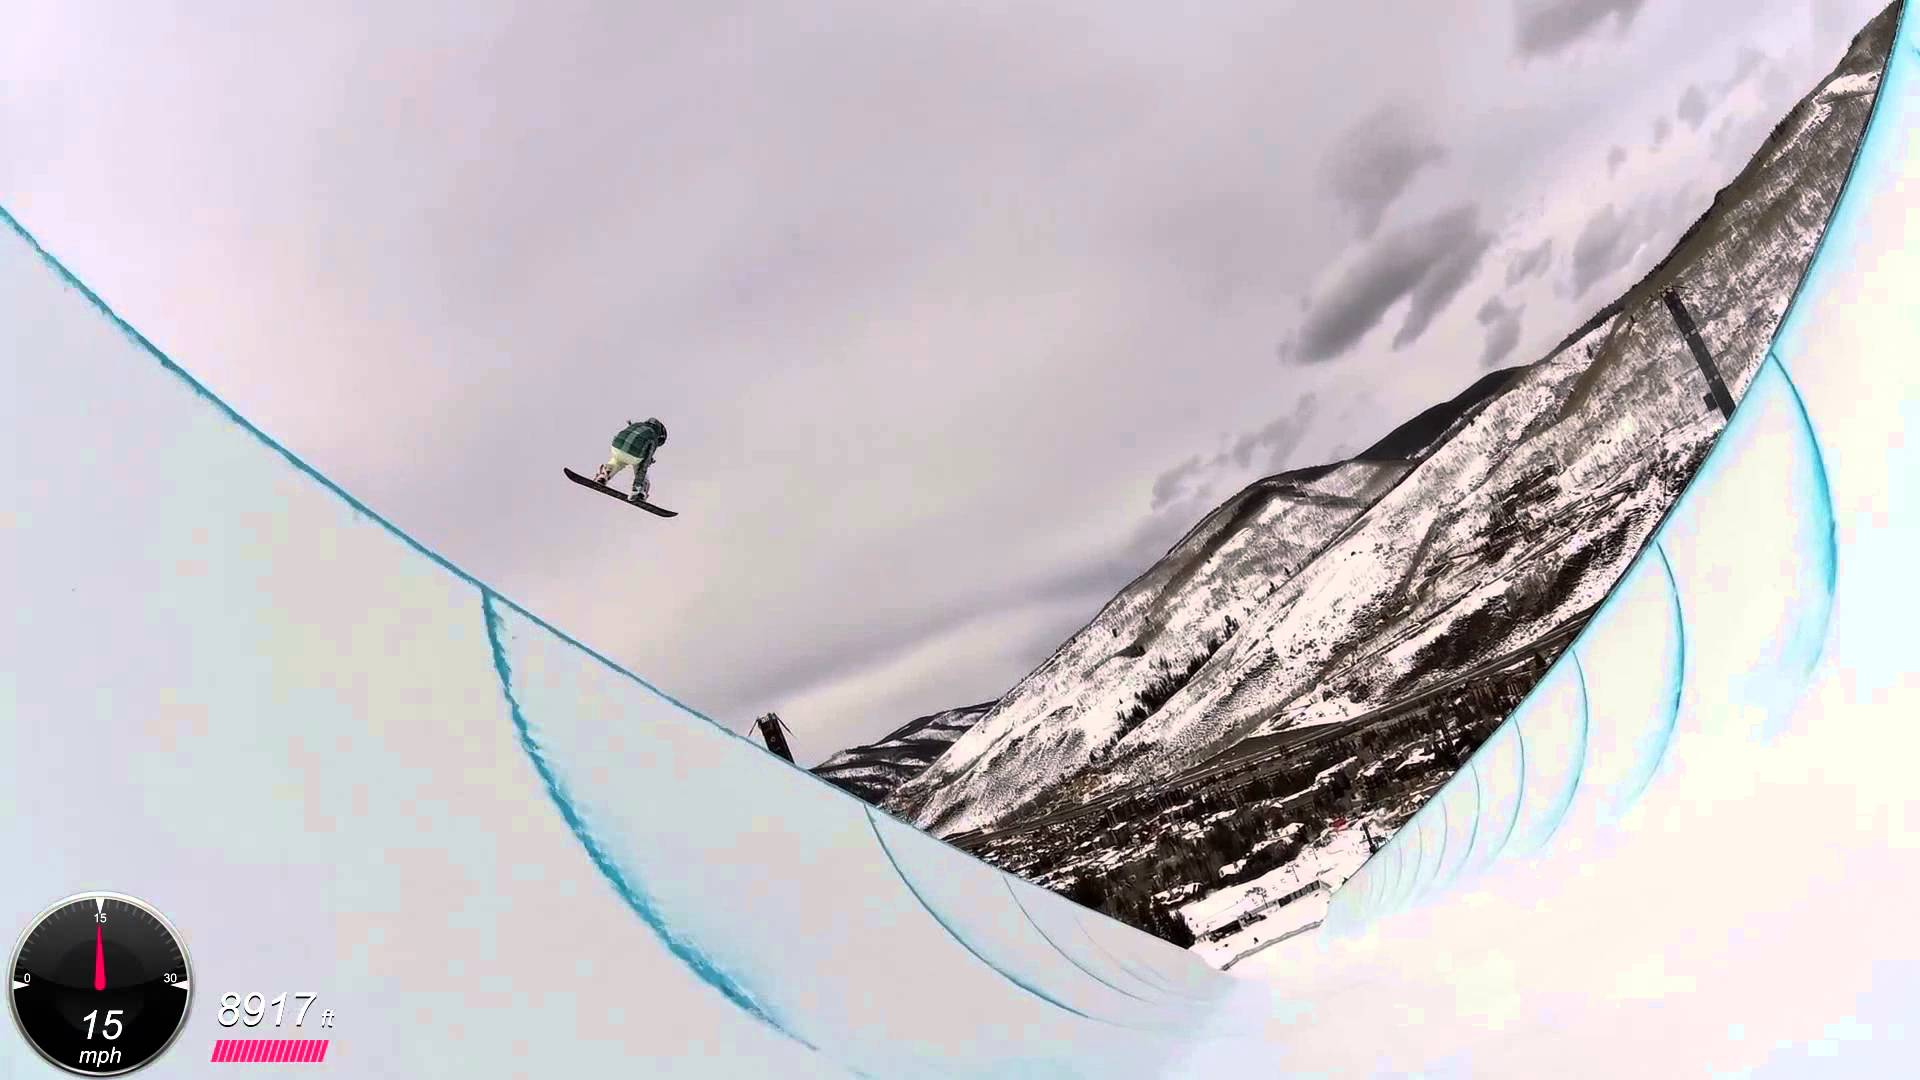 US Open Halfpipe POV Preview with Chloe Kim and the Garmin VIRB